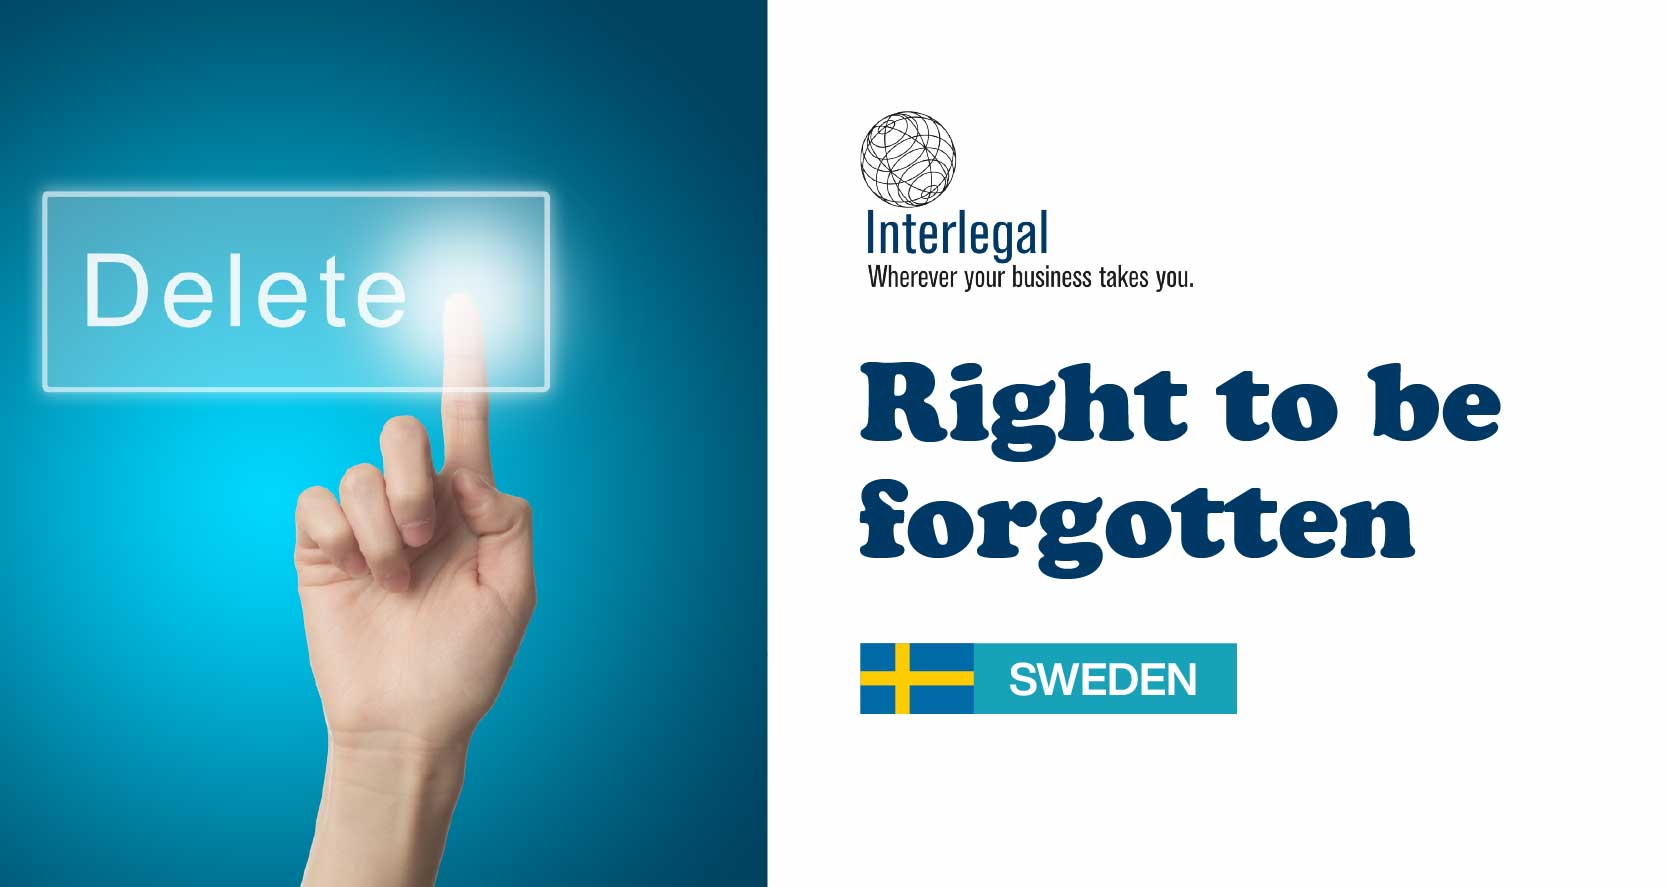 Right to be forgotten in Sweden